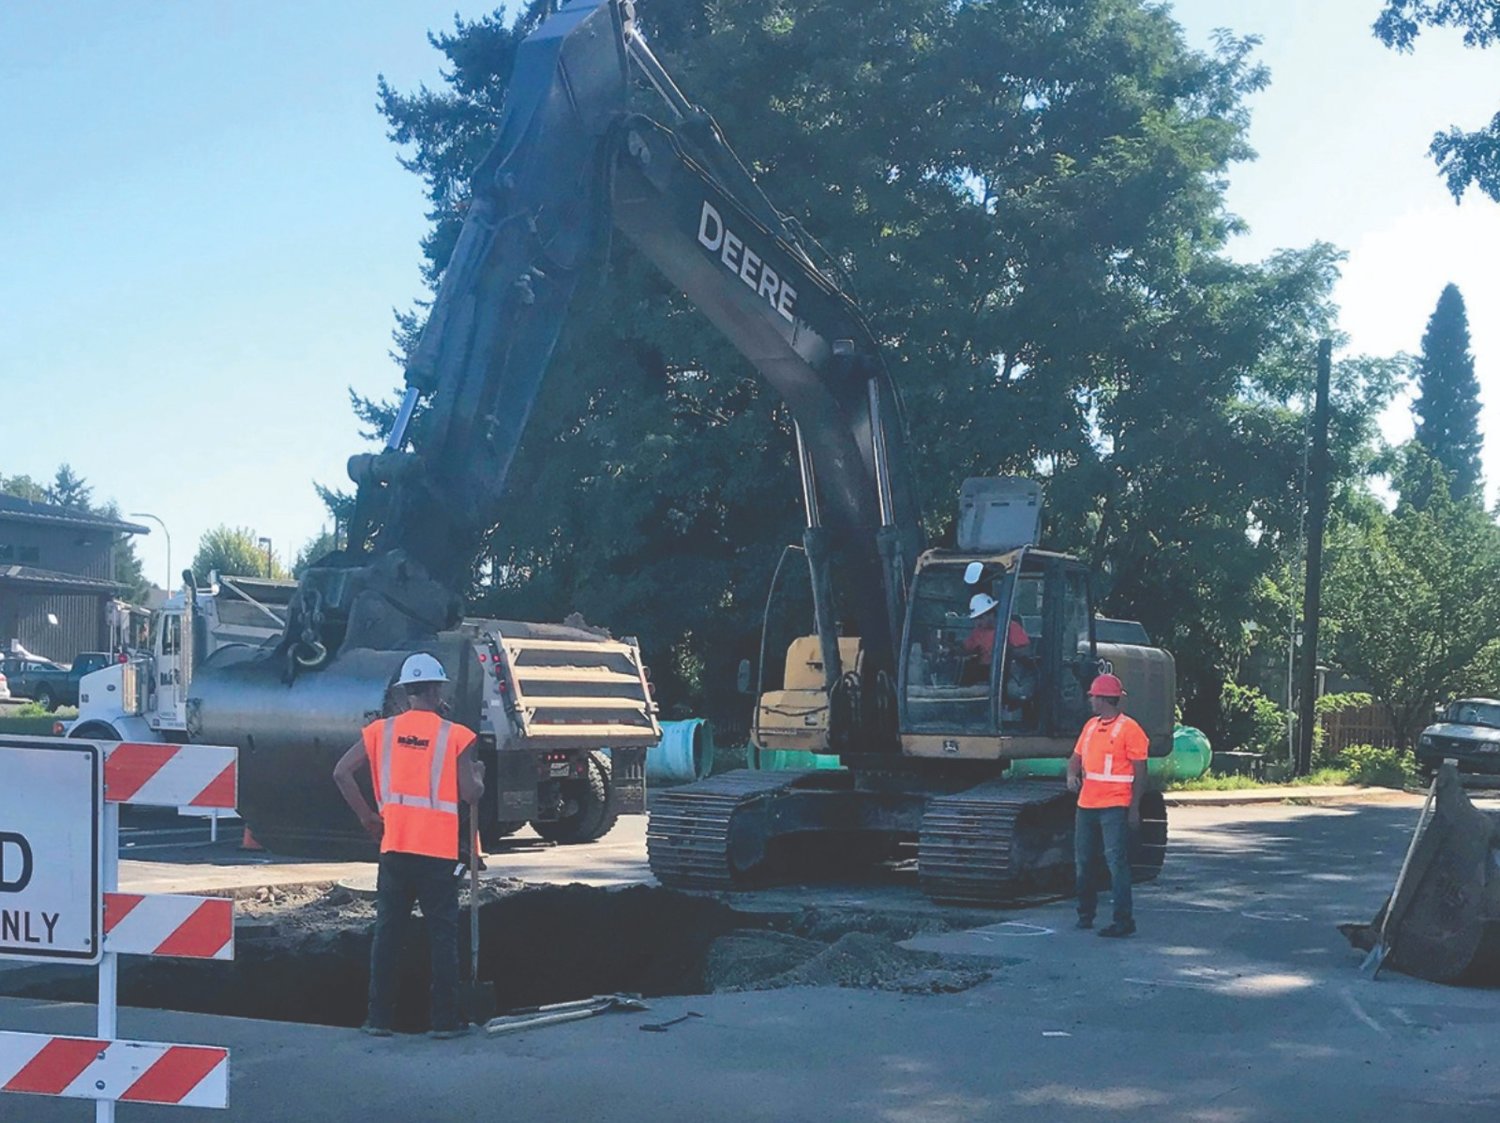 Midway Underground LLC worked on the Centralia Station off-site infrastructure improvements project in late summer. The Port of Centralia has undertaken $800,000 in improvements to city water, sewer and streets to support Centralia Station and commercial development in the surrounding area.